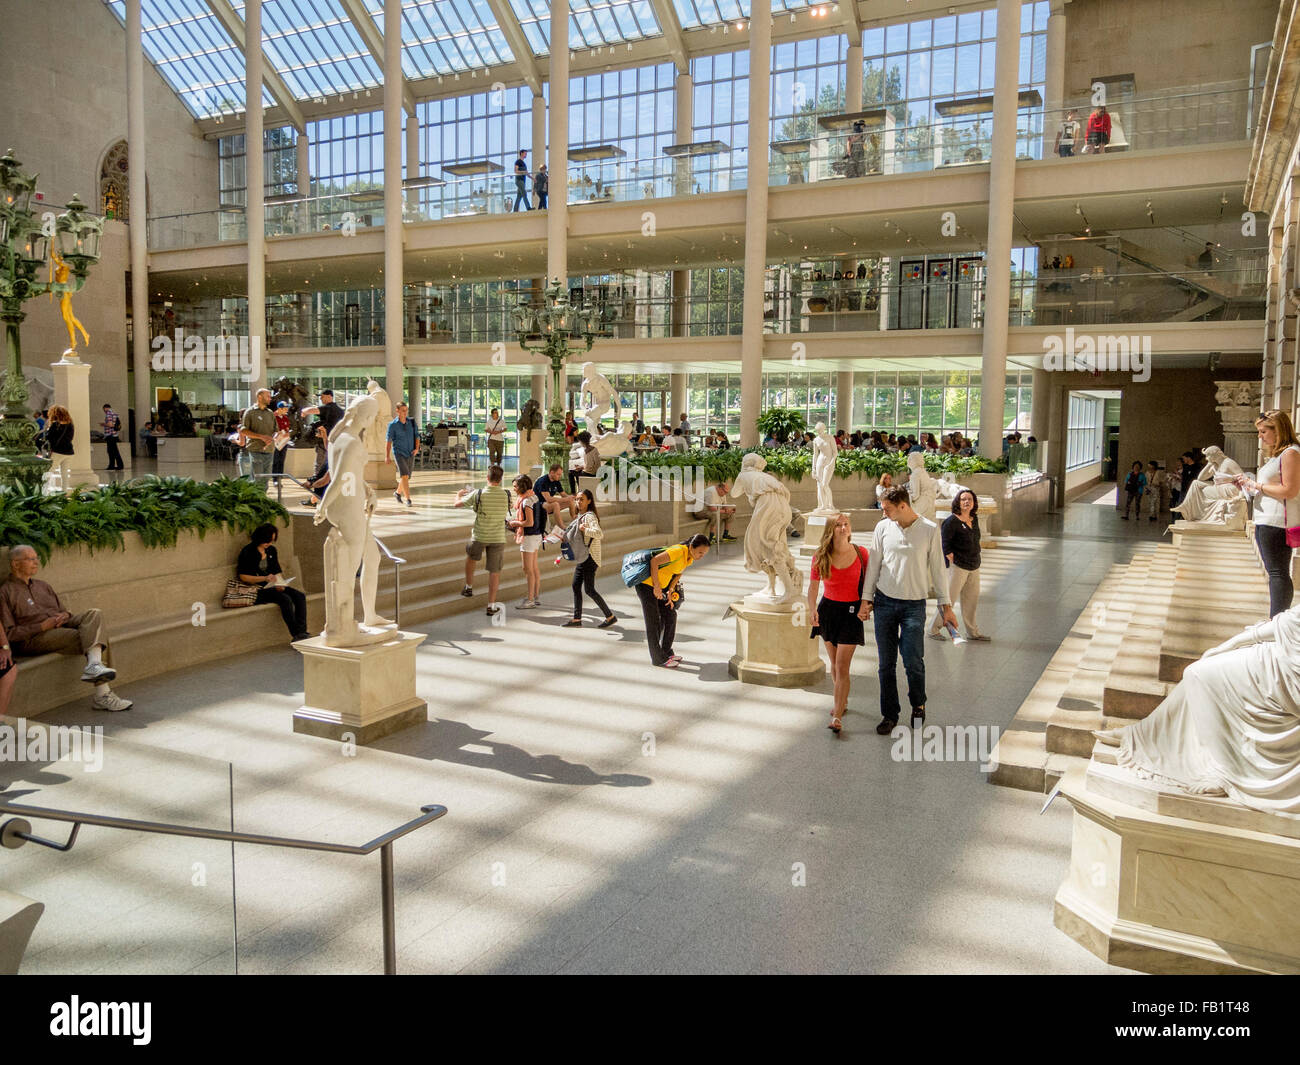 The Charles Engelhard Court in The American Wing of New York's Metropolitan Museum of Art is a glassed-in courtyard featuring large-scale American sculptures, stained-glass windows, and many other architectural elements. Stock Photo